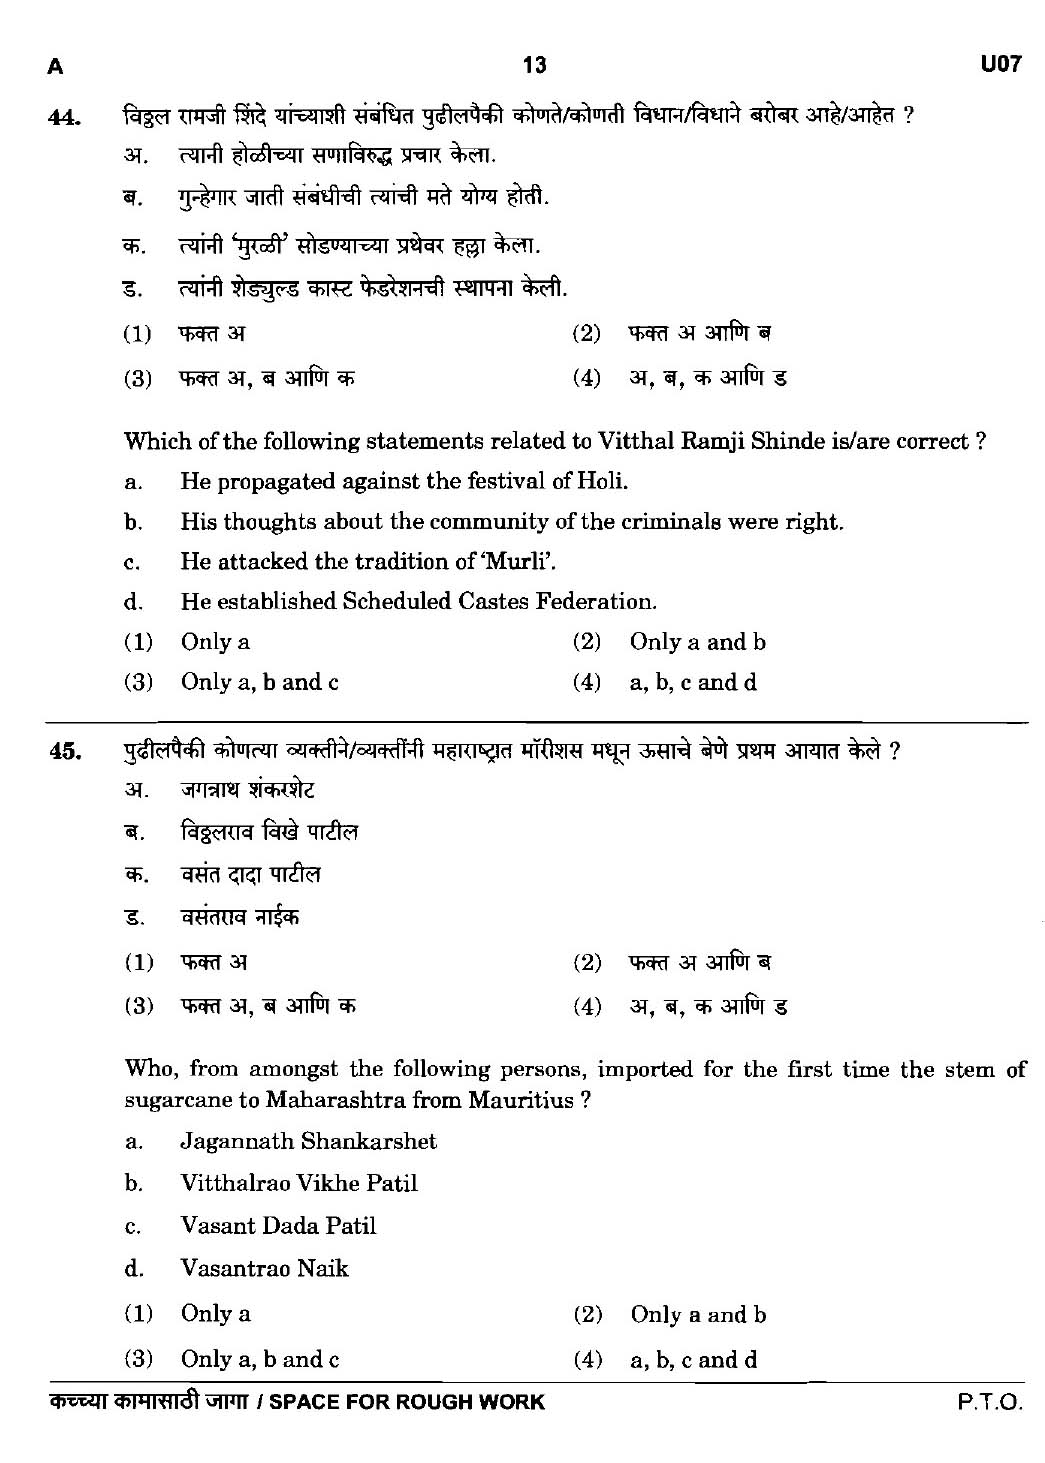 MPSC Agricultural Services Preliminary Exam 2016 Question Paper 12